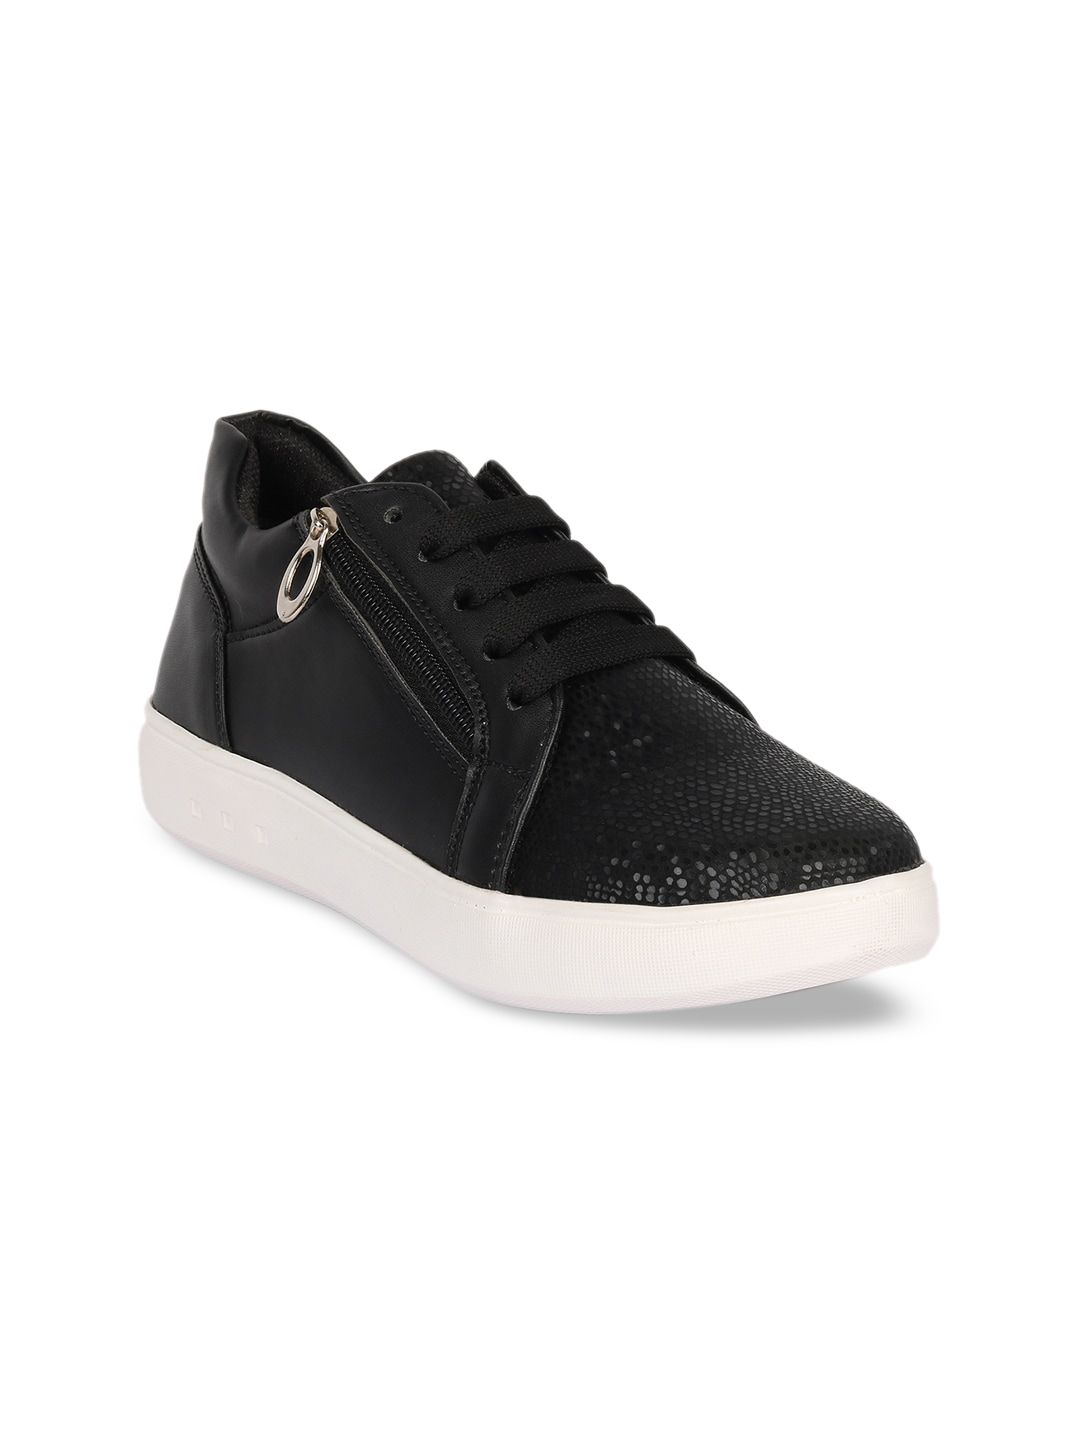 ZAPATOZ Women Black Textured PU Sneakers Casual Shoes Price in India